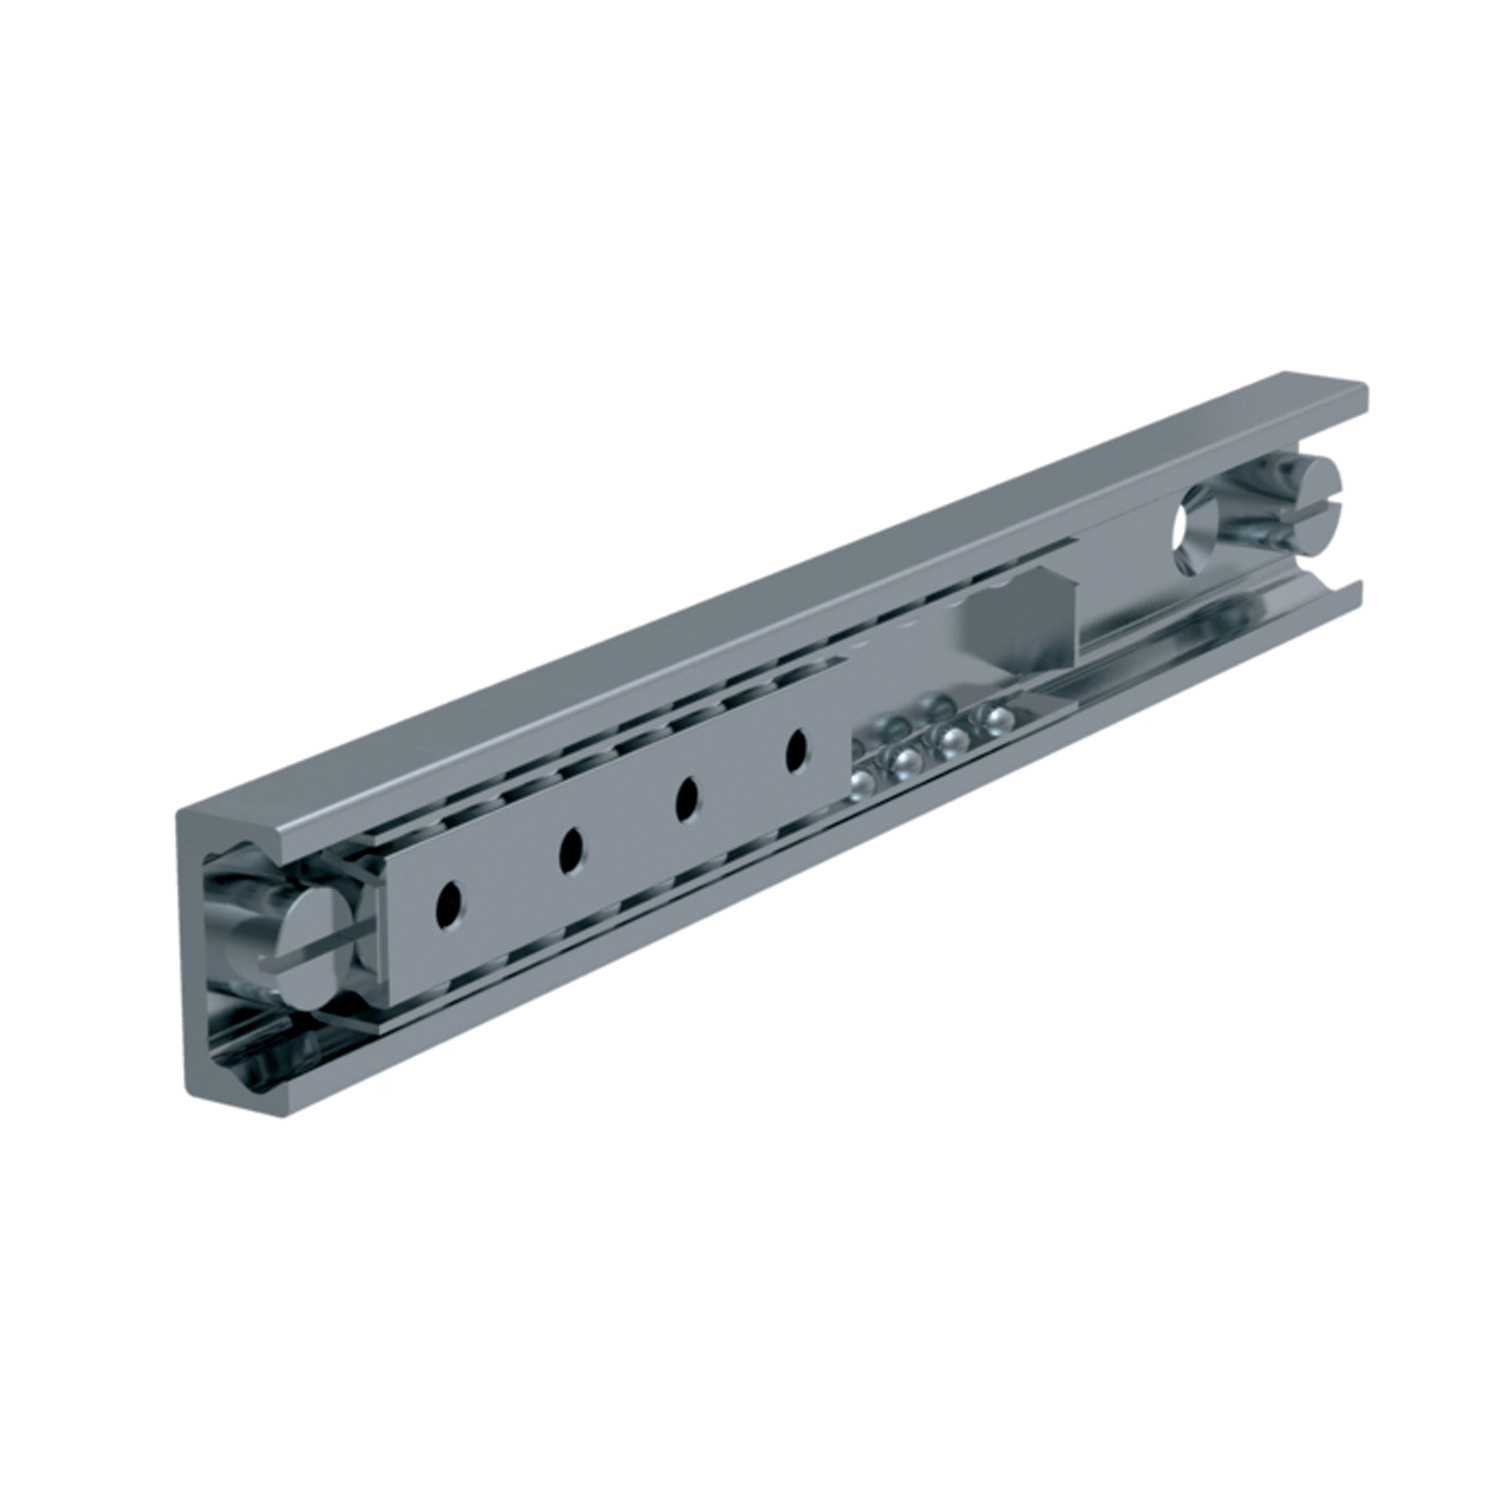 High Load Rails Easy-slide, high-load Guides come in sizes 28, 35, 43 or 63. They are made from zinc-plated steel with induction-hardened steel raceways.